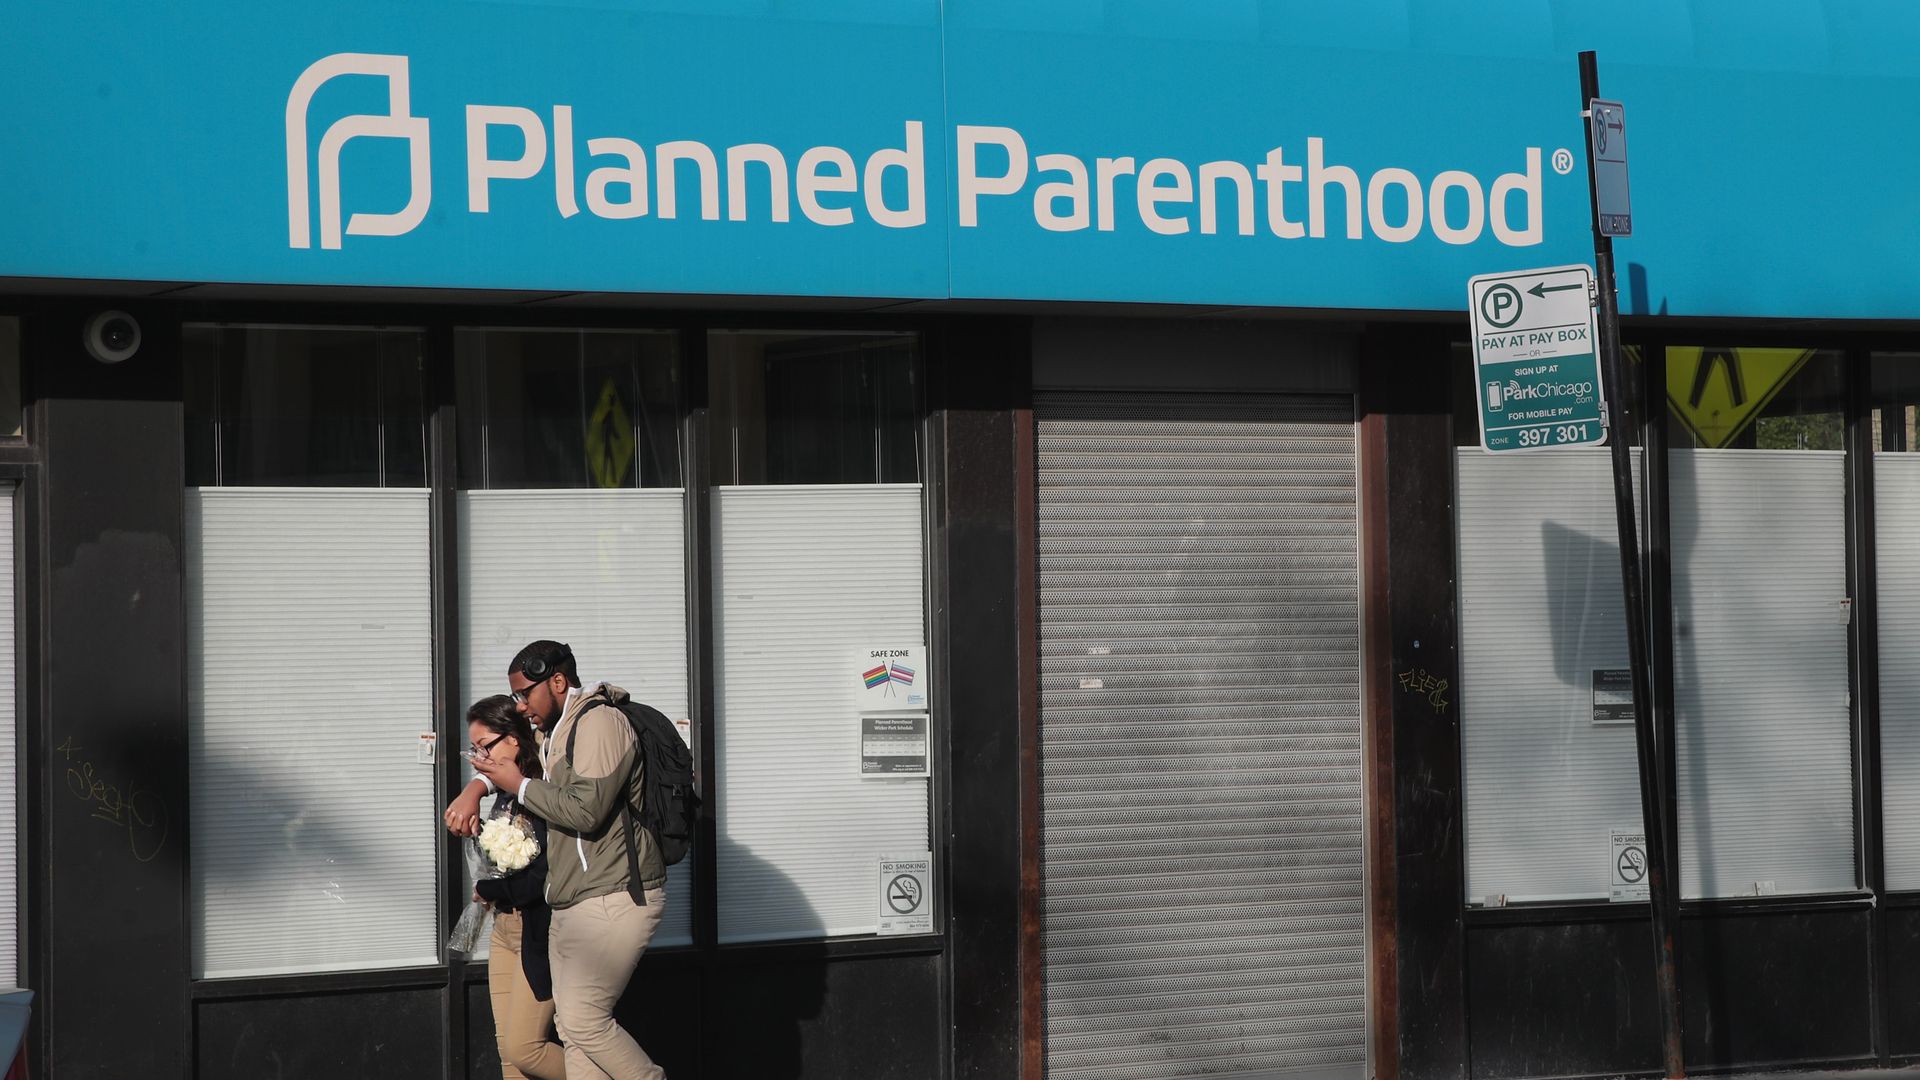 In this image, two people walk down the street in front of a blue awning with the white words "Planned Parenthood" printed on it.